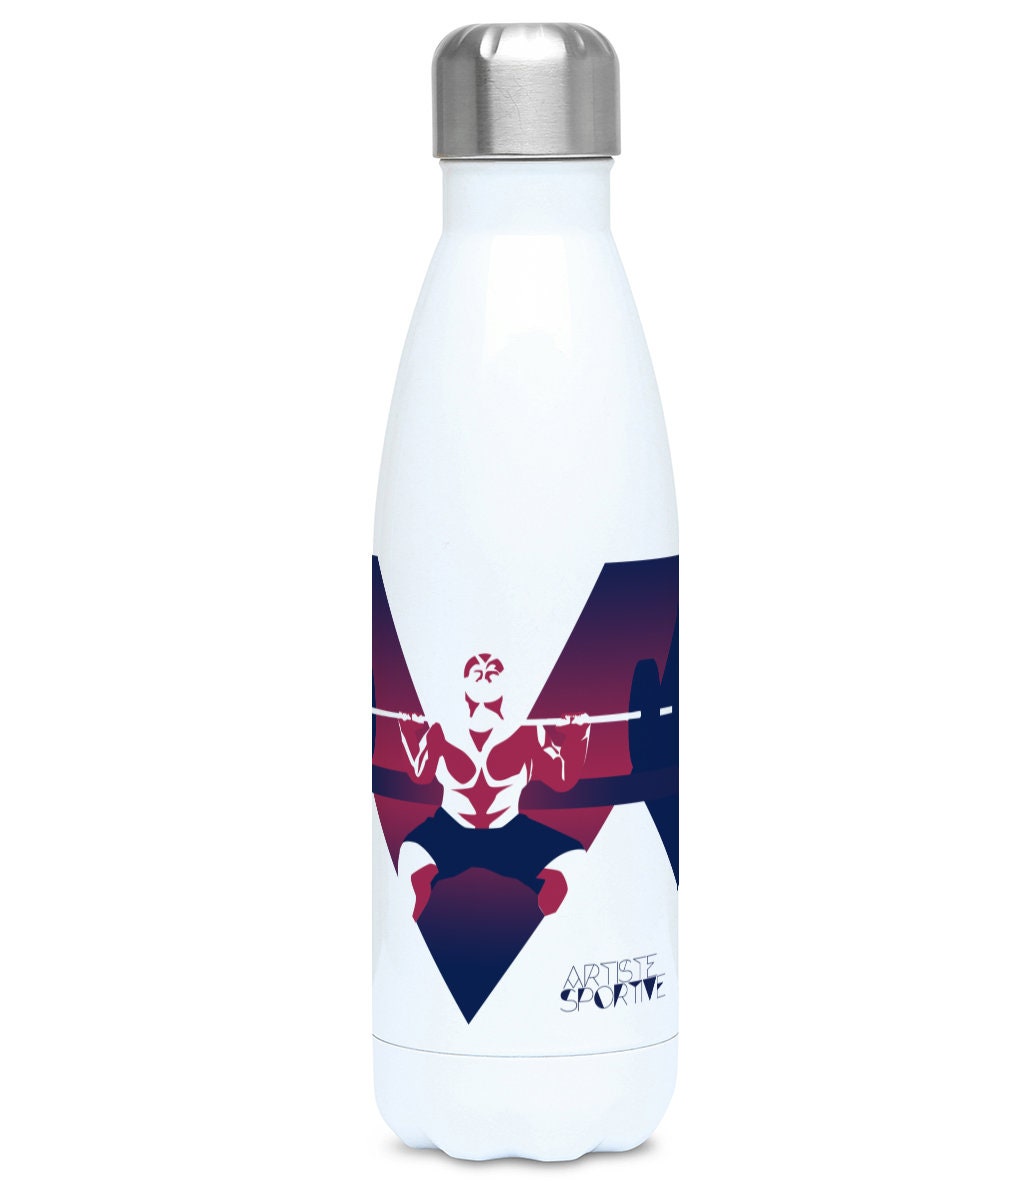 CrossFit insulated bottle "Men's Weightlifting" - Customizable